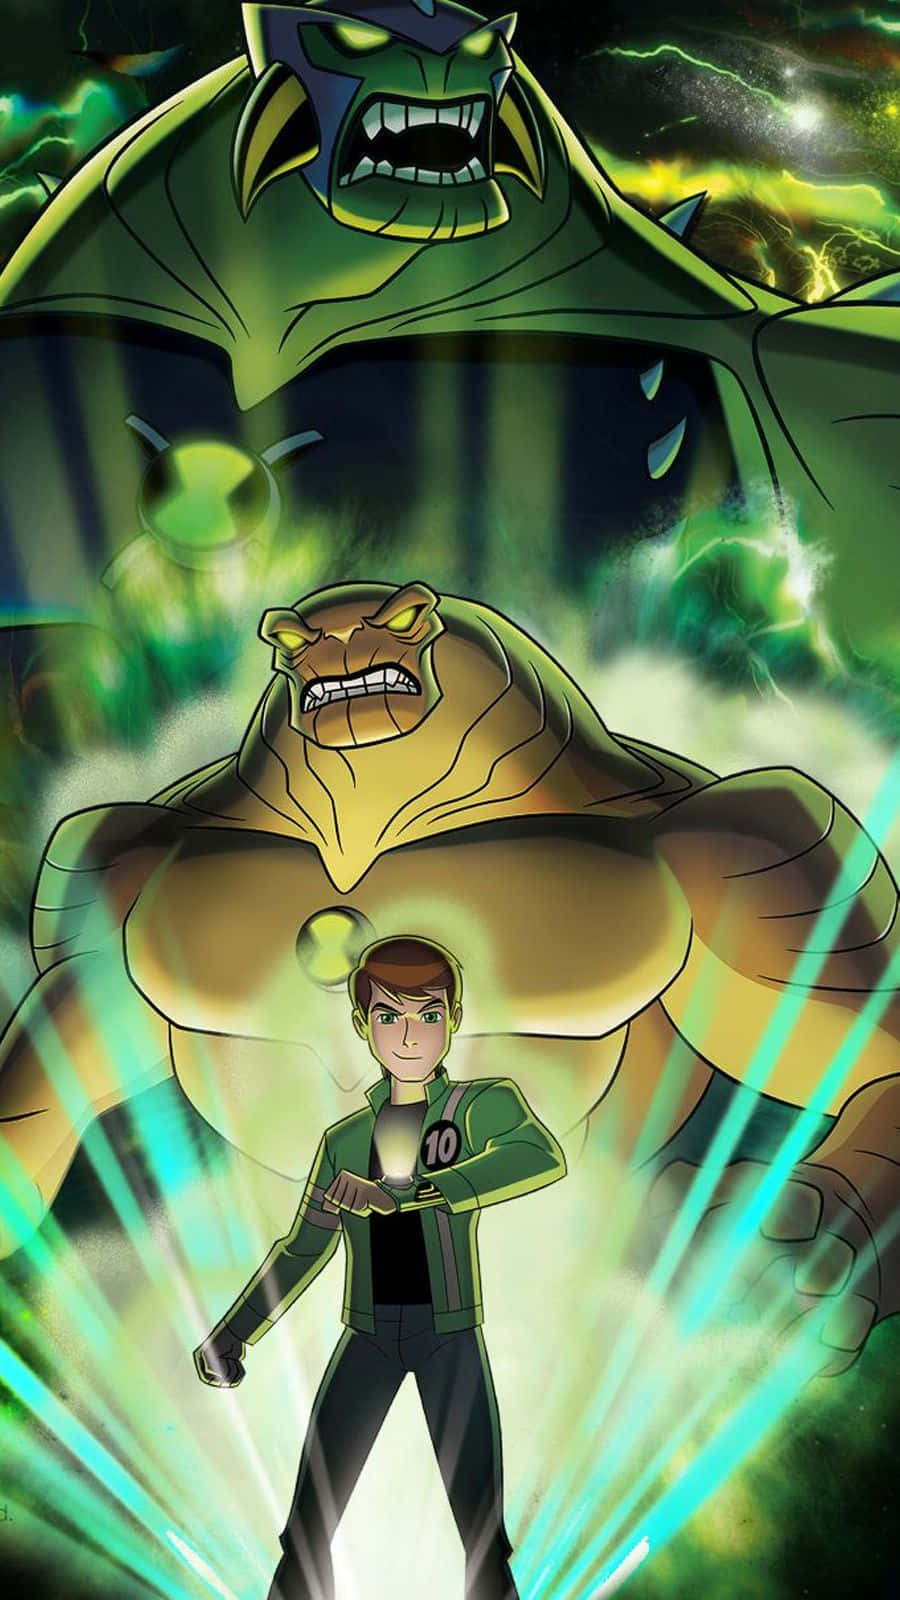 Ben 10 themed background featuring heroes and villains